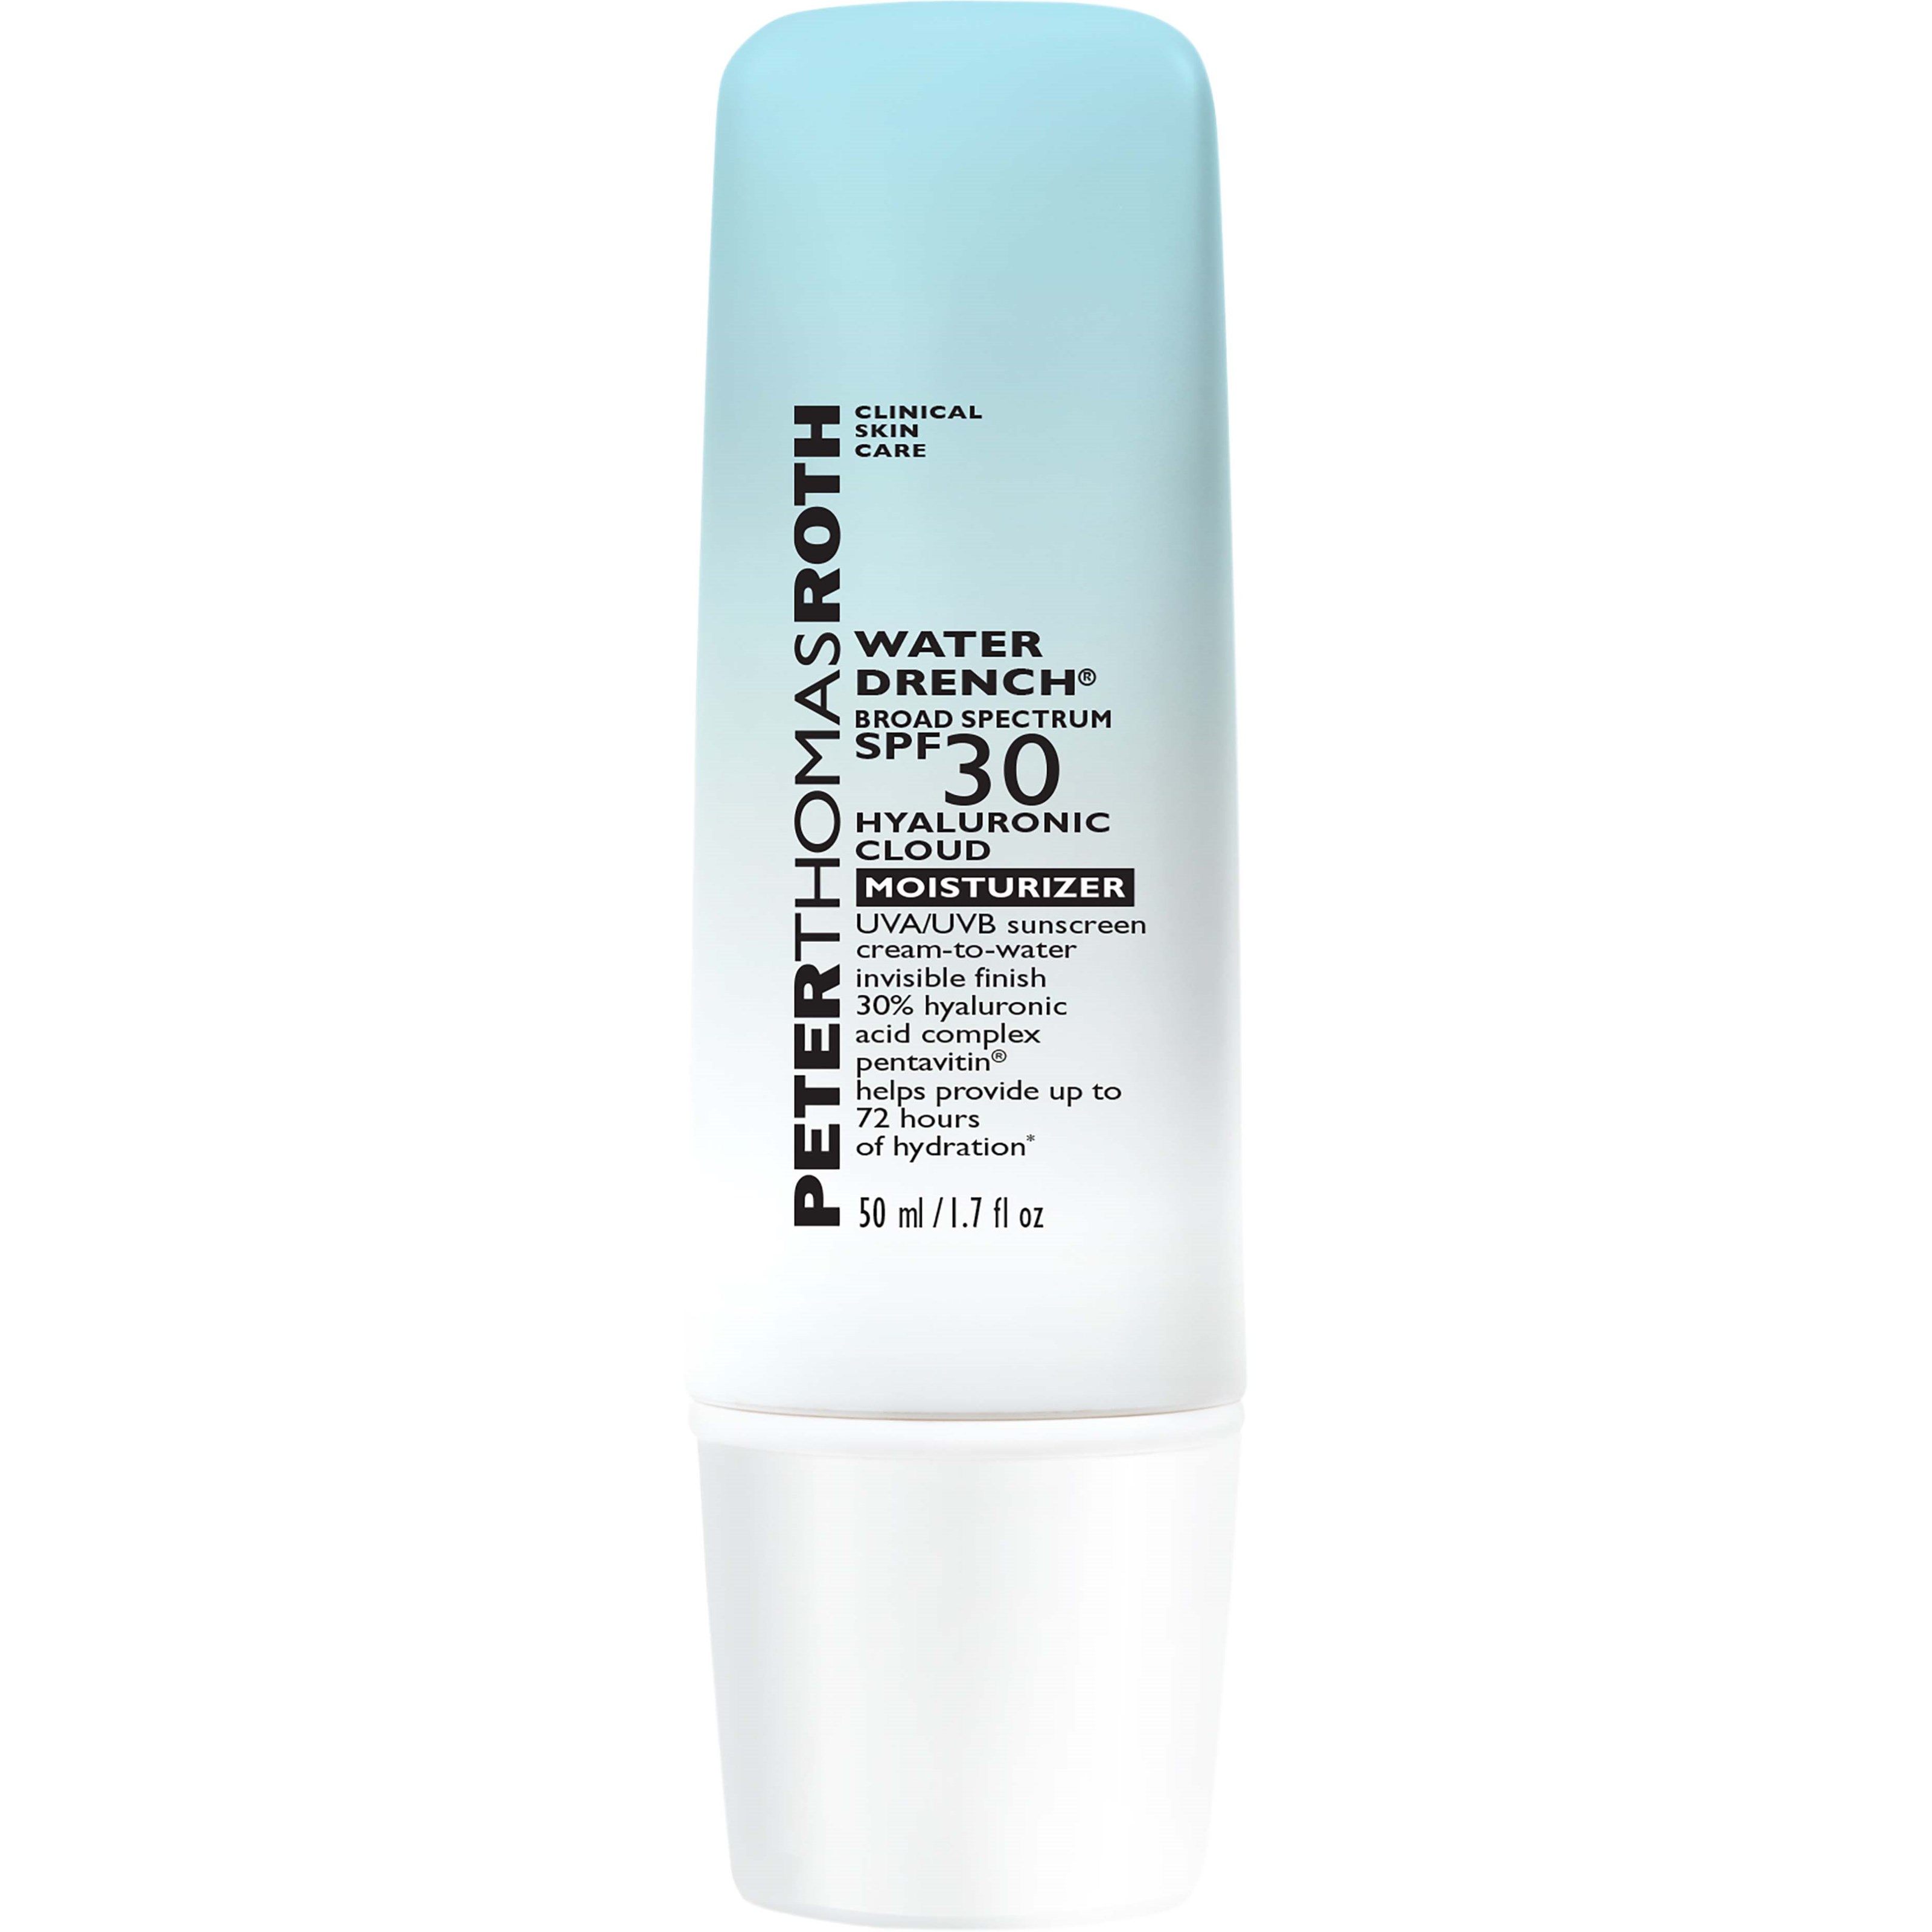 Peter Thomas Roth Water Drench® Broad Spectrum SPF 30 Hyaluronic Cloud